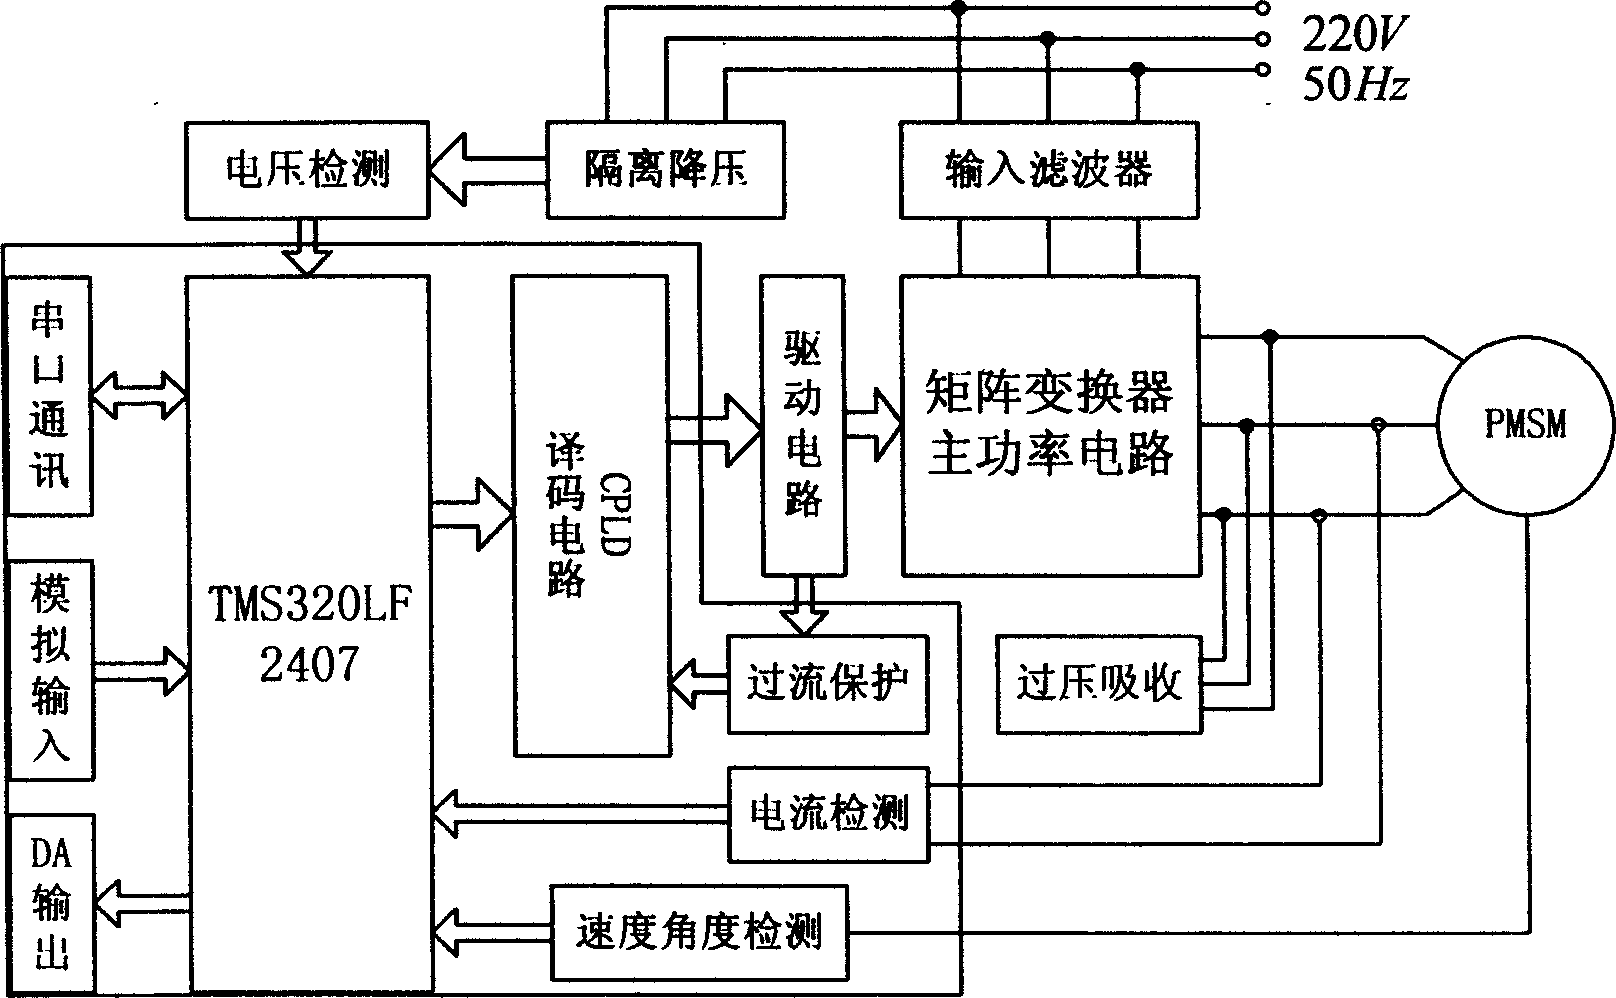 Permanent magnet synchronous motor vector control system